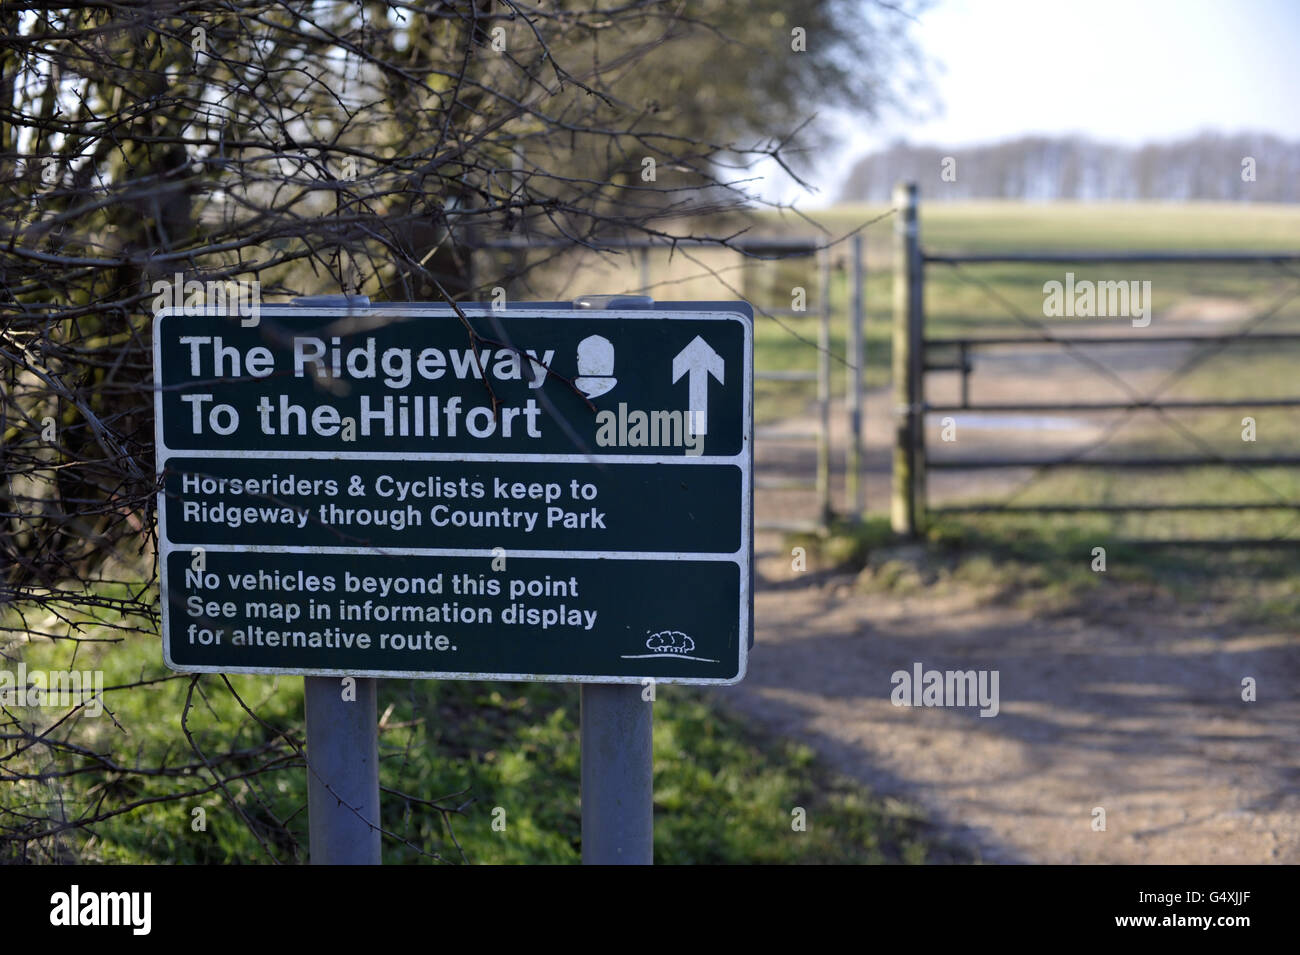 The sign for Barbury Castle, an Iron Age hillfort on the Ridgeway near Swindon in Wiltshire. Stock Photo